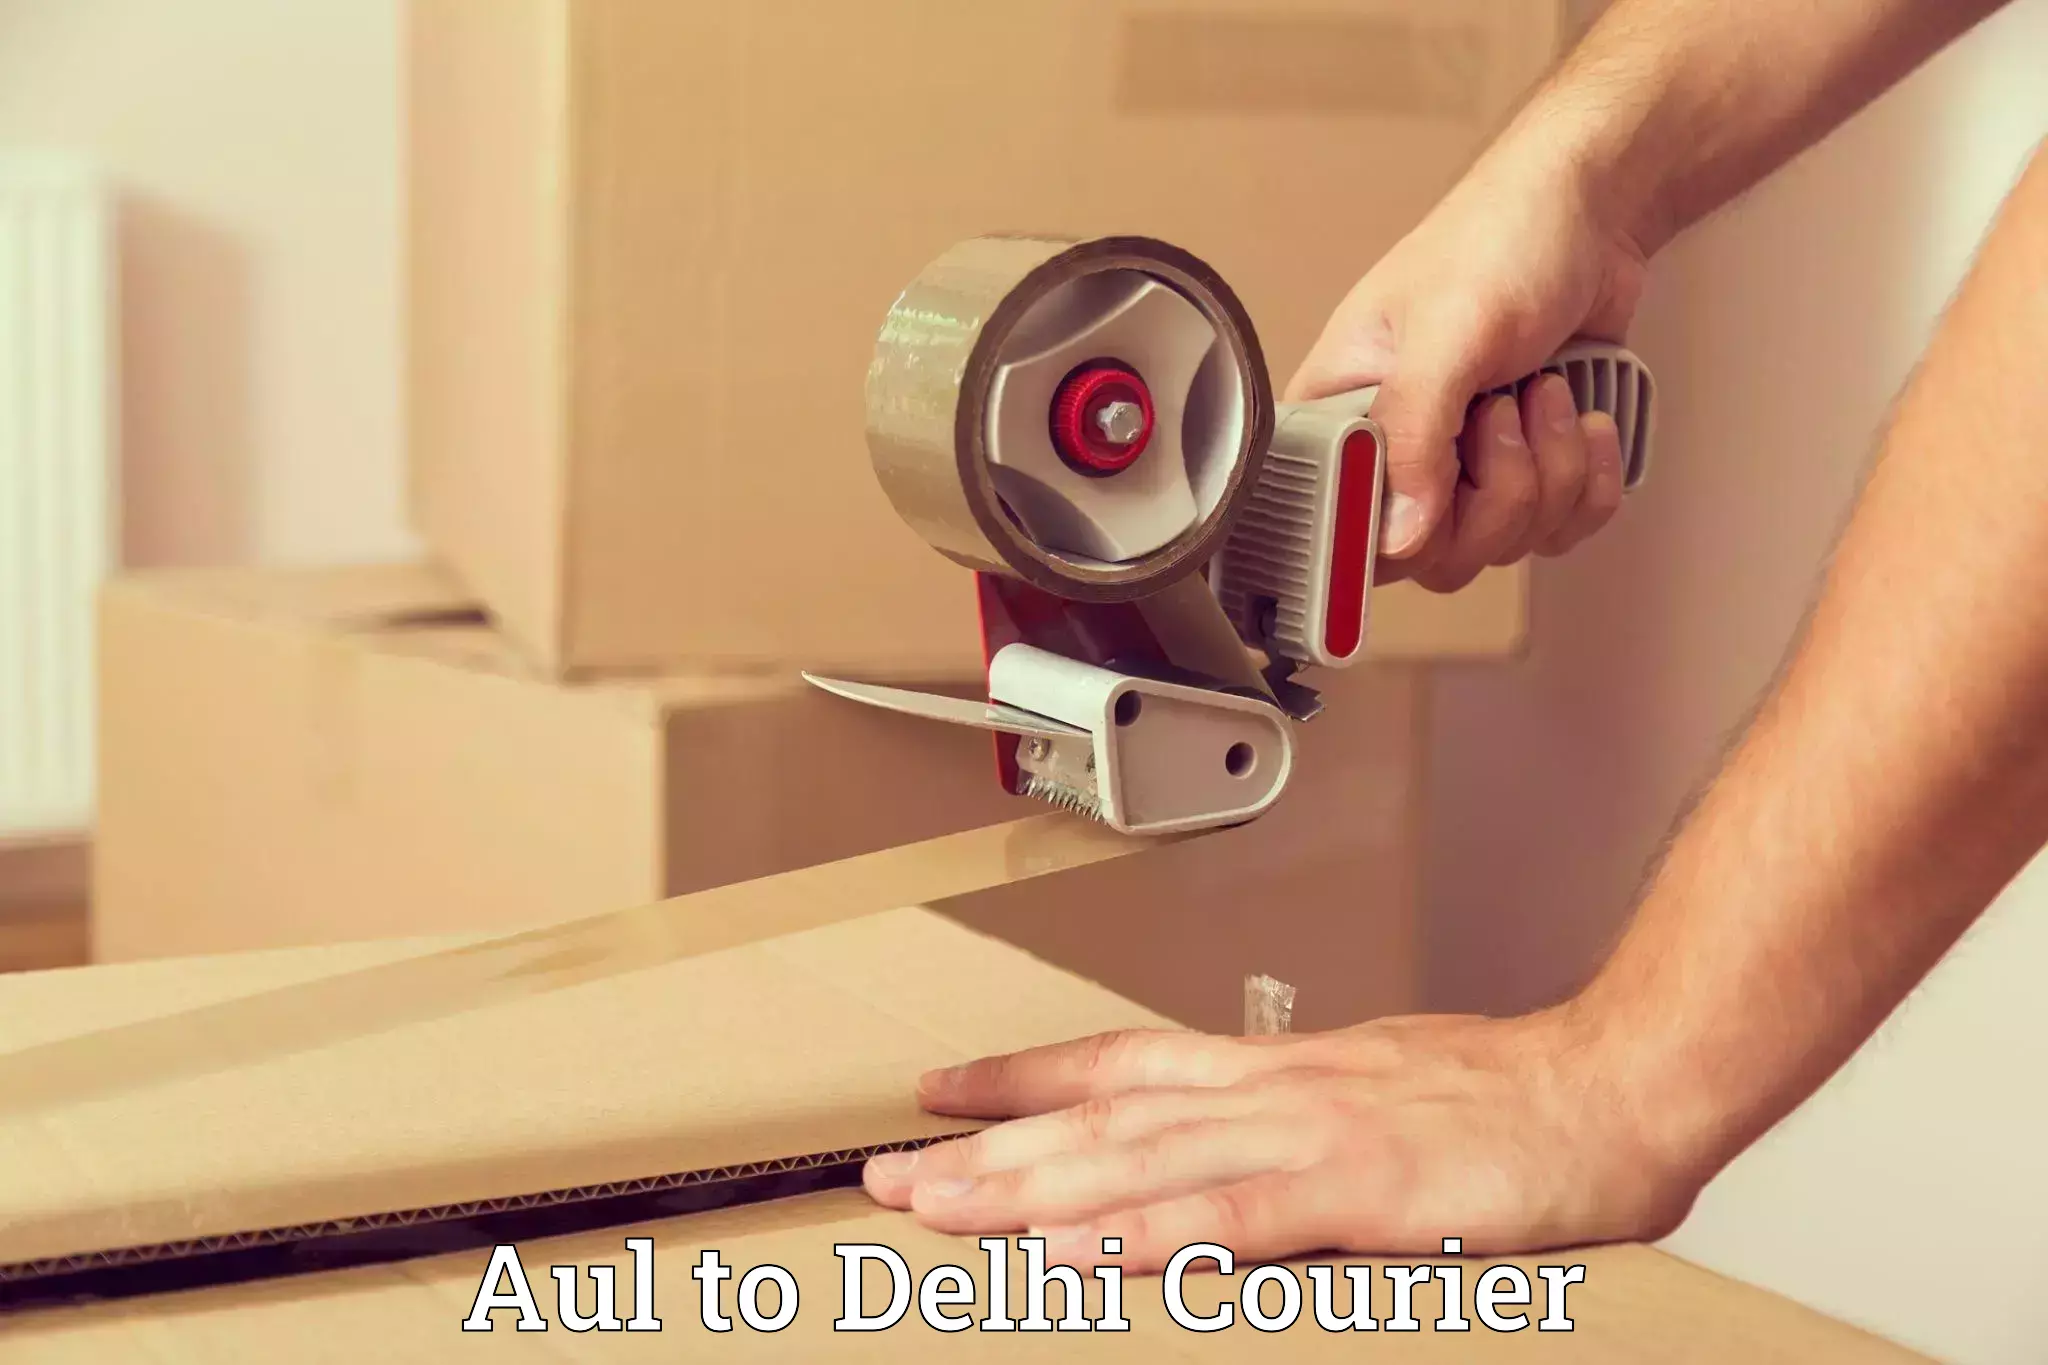 Hassle-free relocation Aul to Delhi